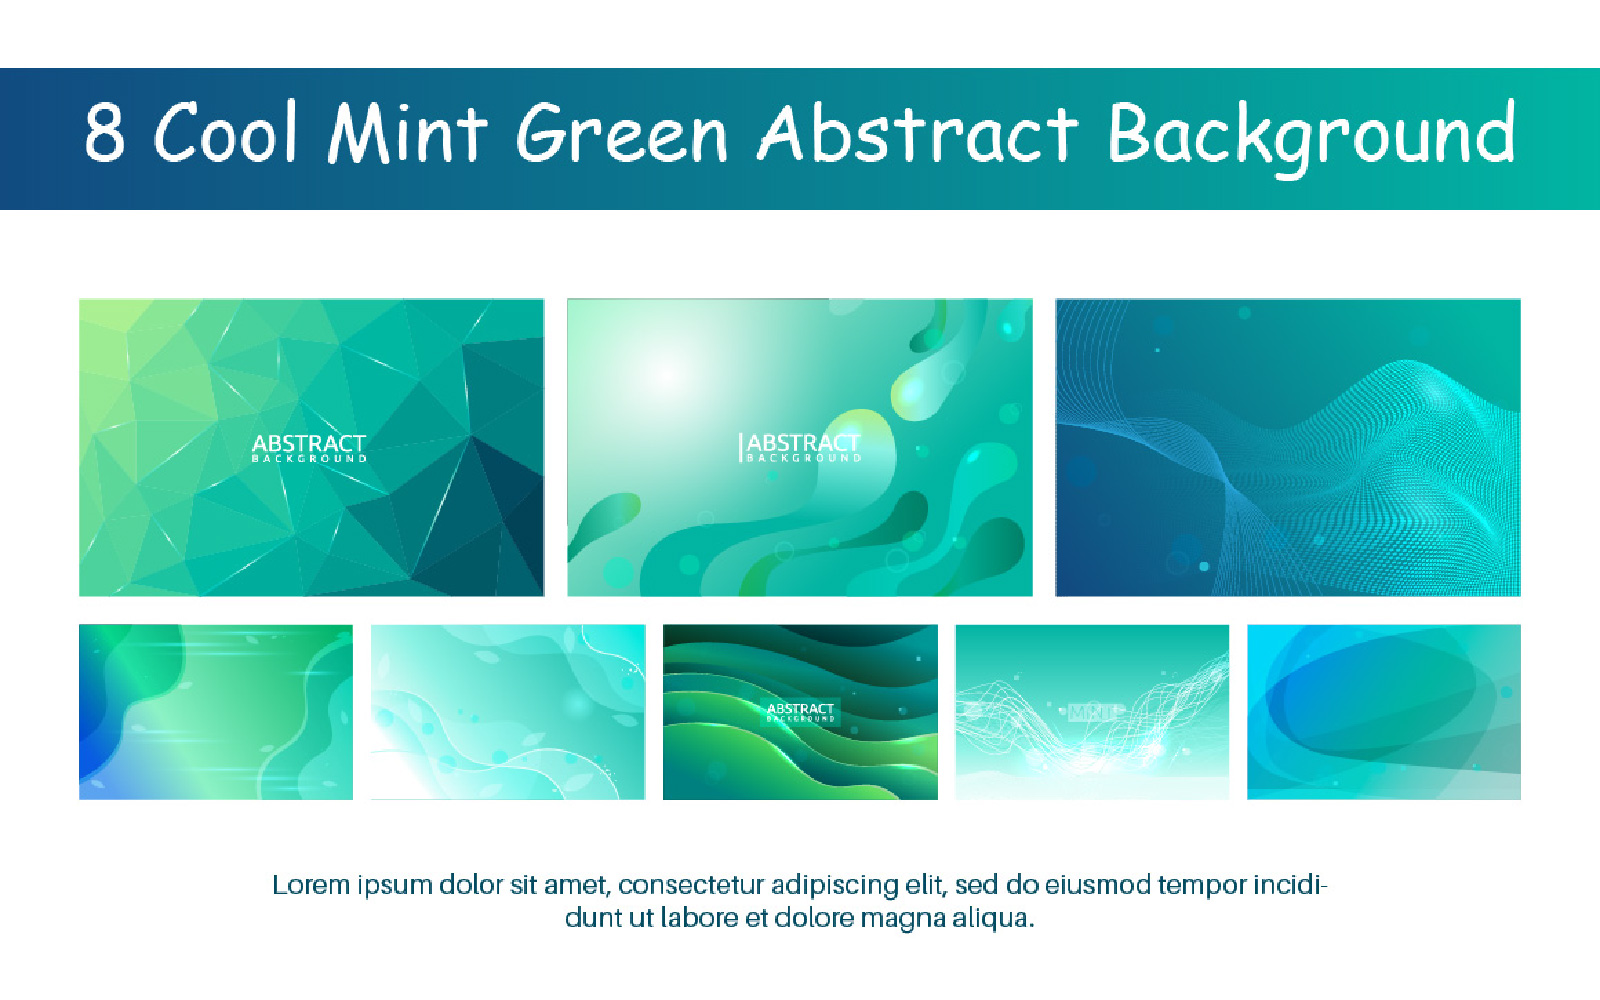 8 Cool Mint Green Abstract Background